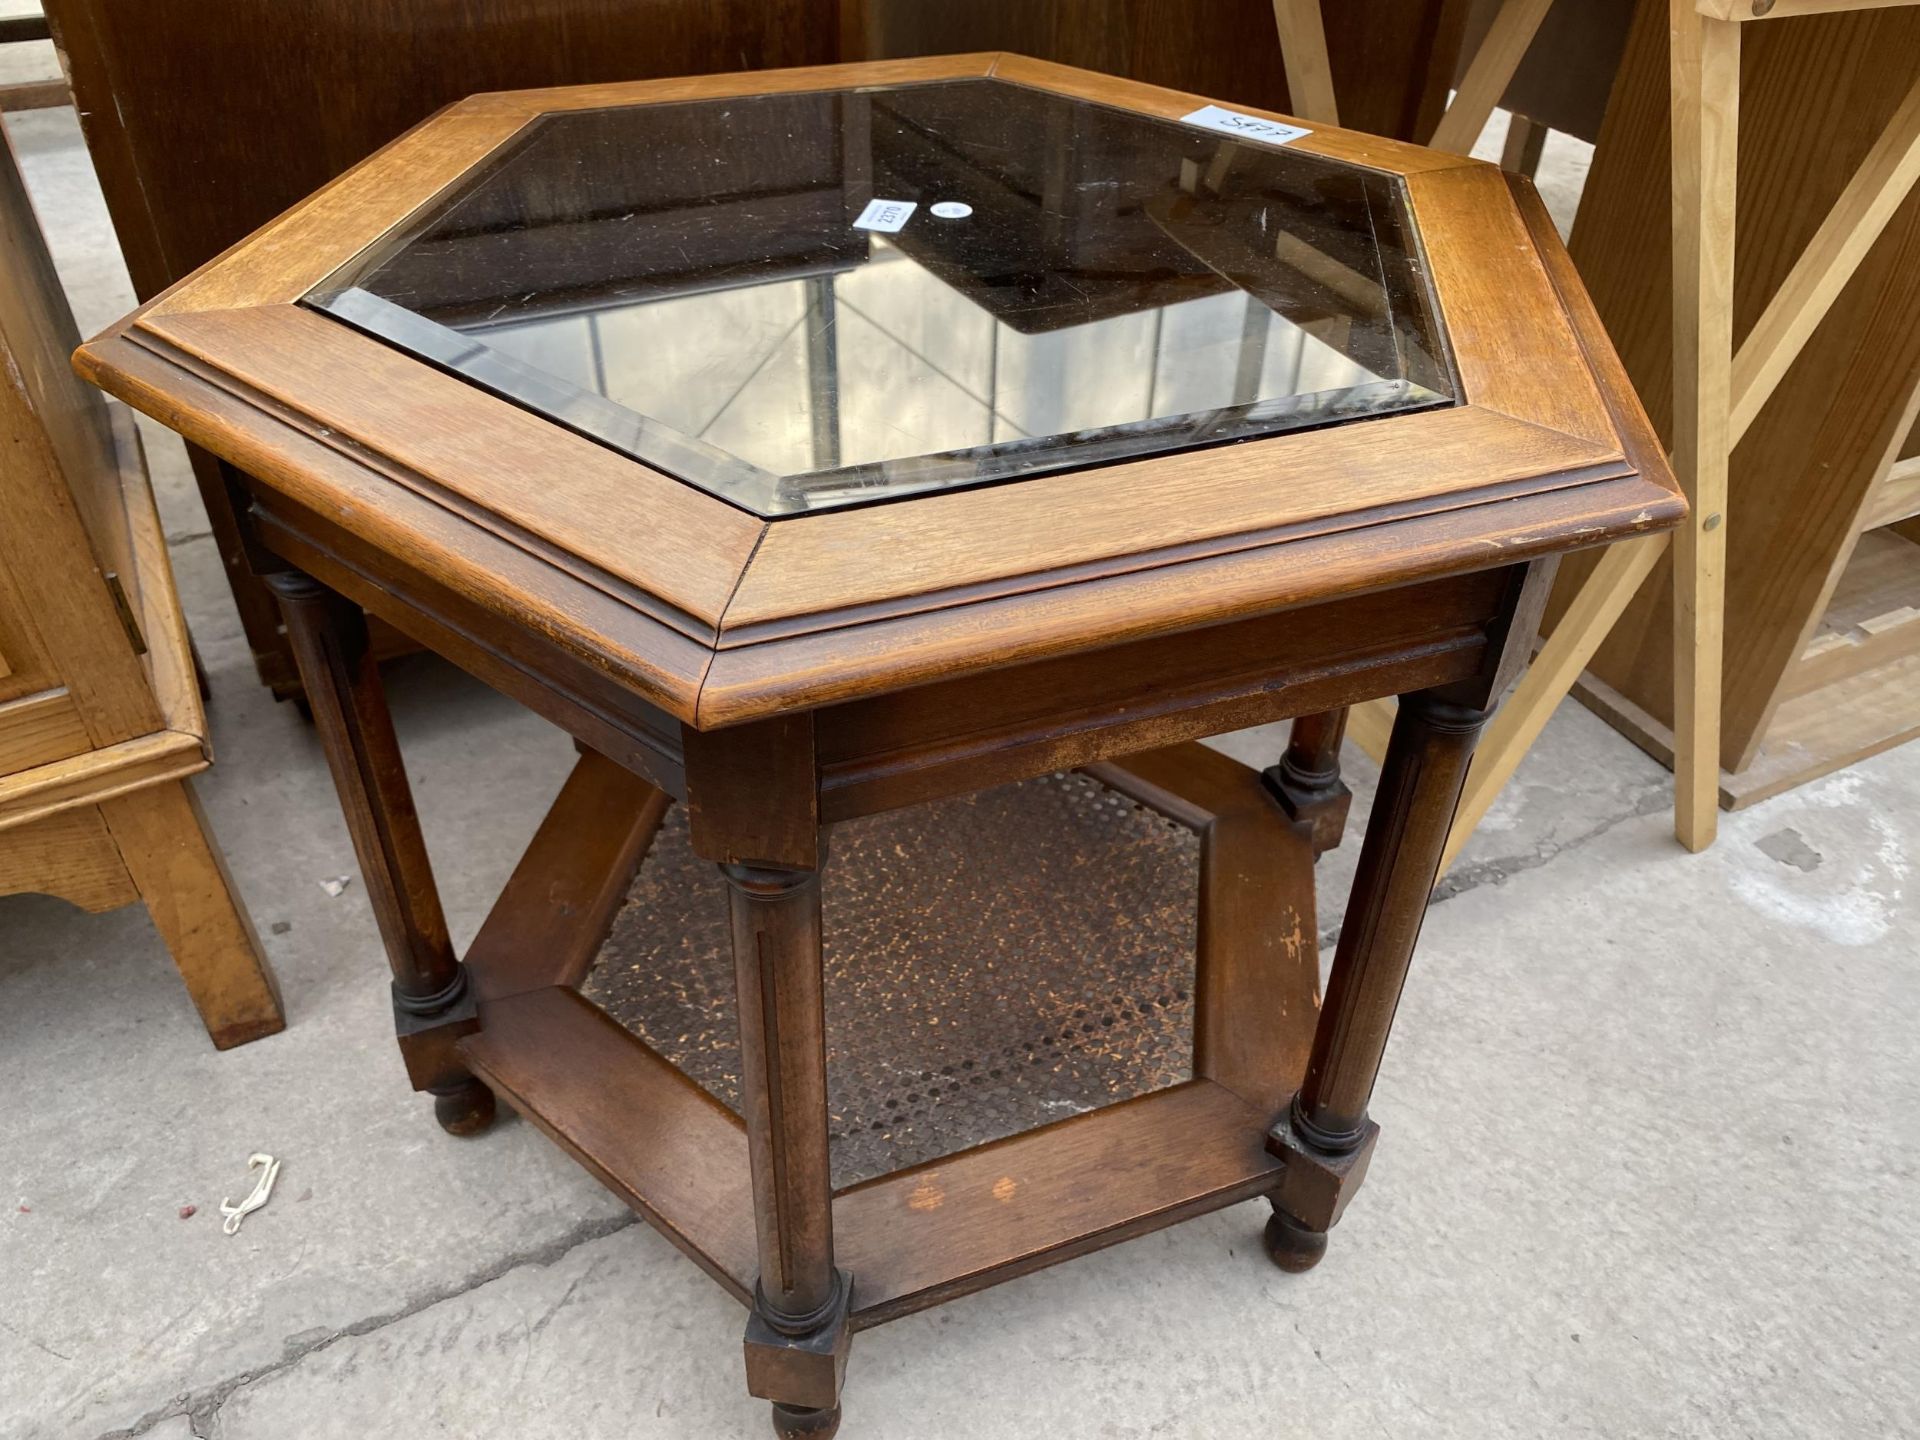 A MODERN HEXAGONAL COFFEE TABLE WITH GLASS INSET TOP AND SPLIT CANE BOTTOM TIER, 28" ACROSS MAX